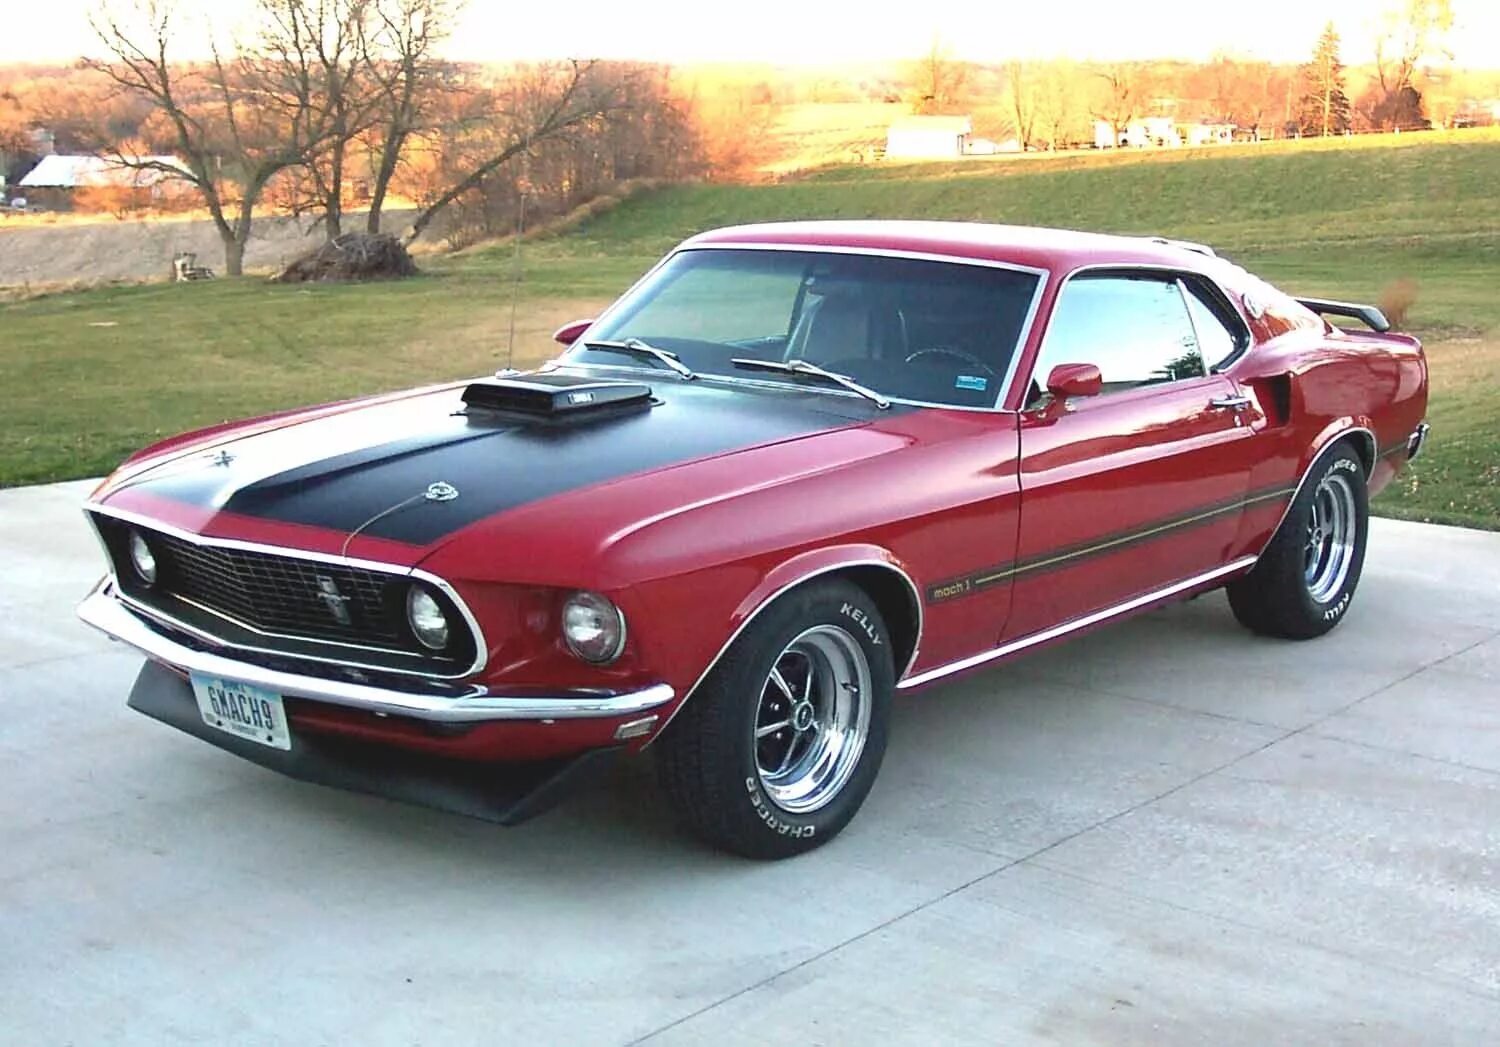 Best old cars. Мустанг 1969. Ford Mustang 1969. Форд Мустанг 1980-1990. Форд Мустанг 1980.